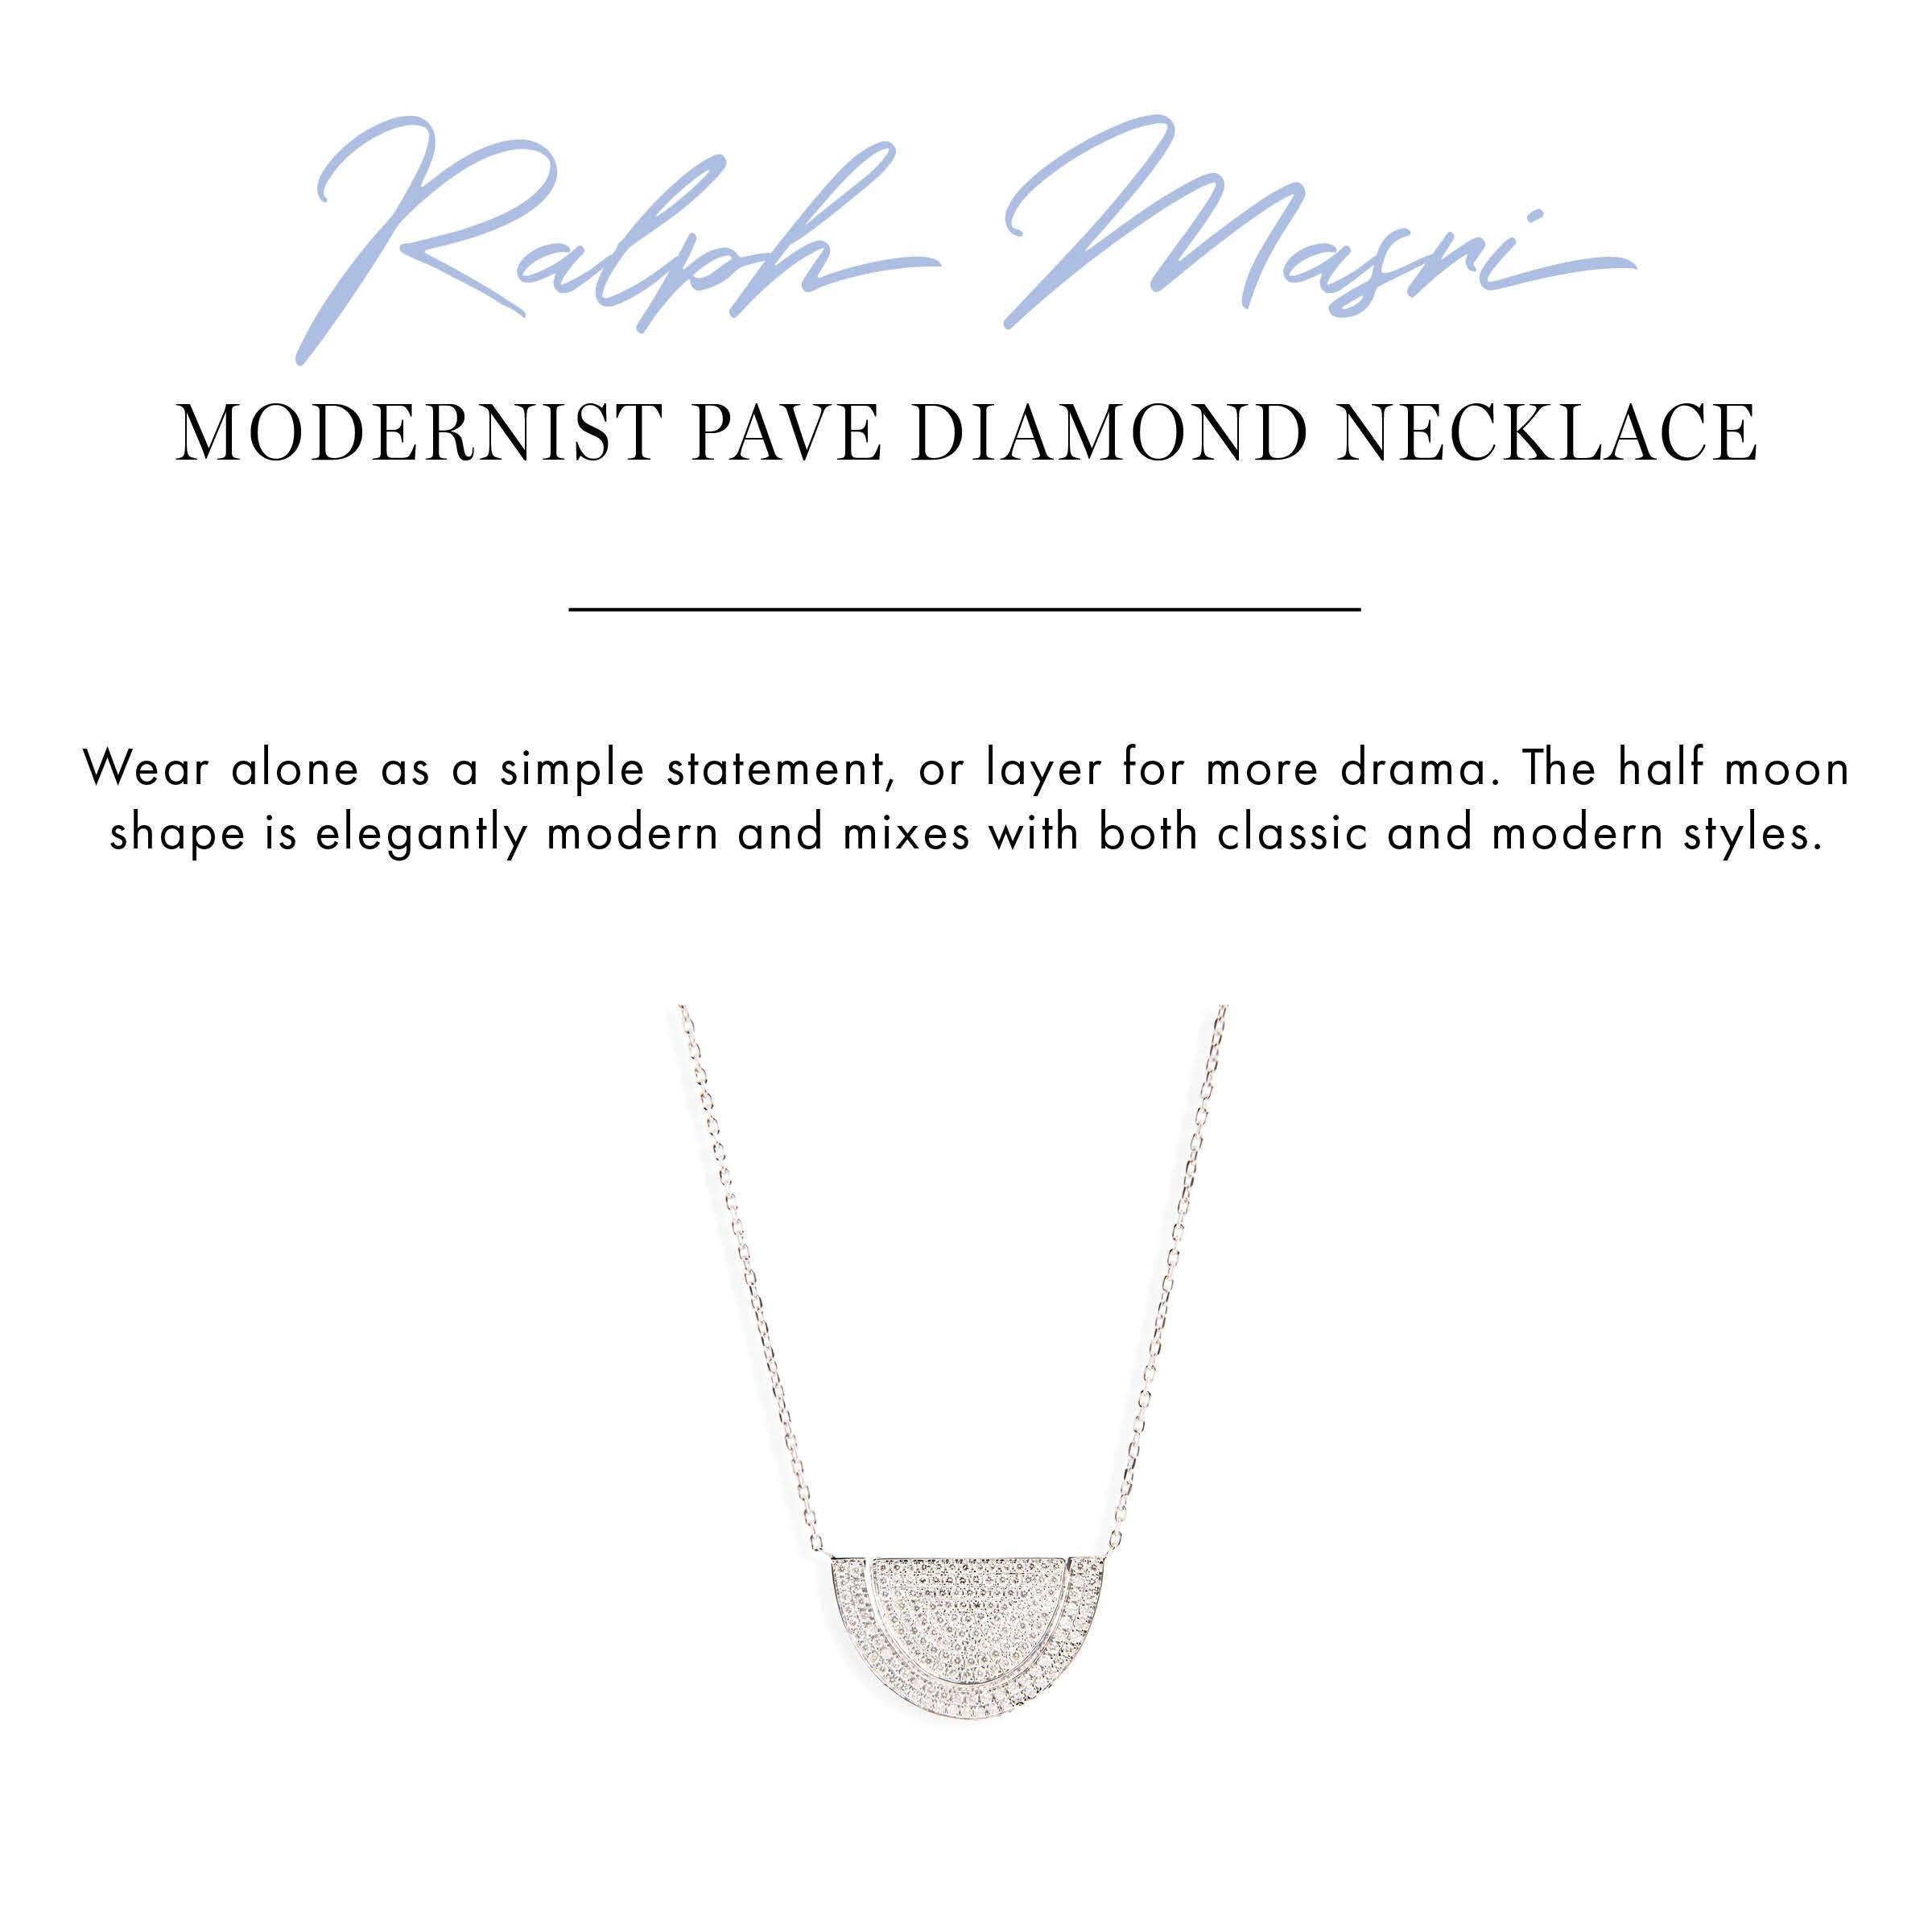 Wear alone as a simple statement, or layer for more drama. The half moon shape is elegantly modern and mixes with both classic and modern styles. 

18k White Gold
Diamond and sapphire pave
Diamond TCW is 1.15 and Sapphire TCW is 0.25
The pendant is